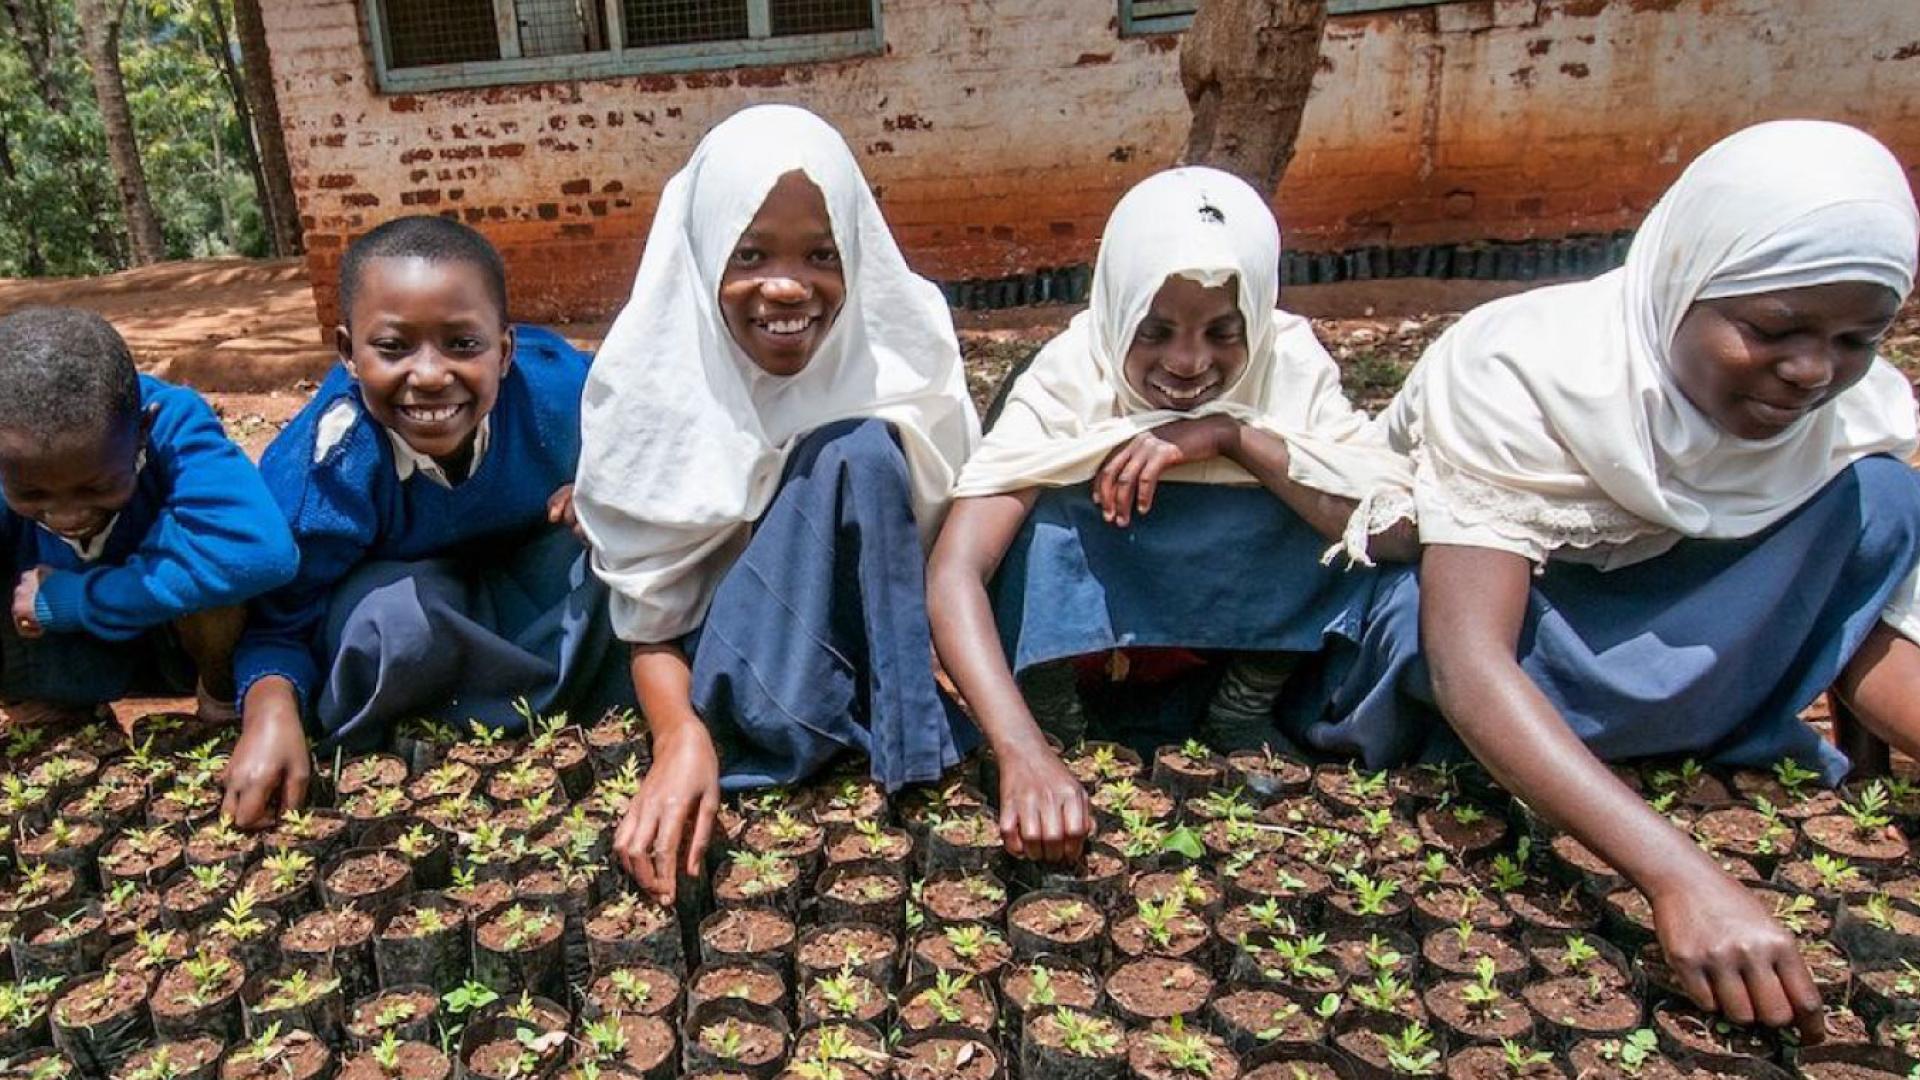 Young people planting seeds and smiling